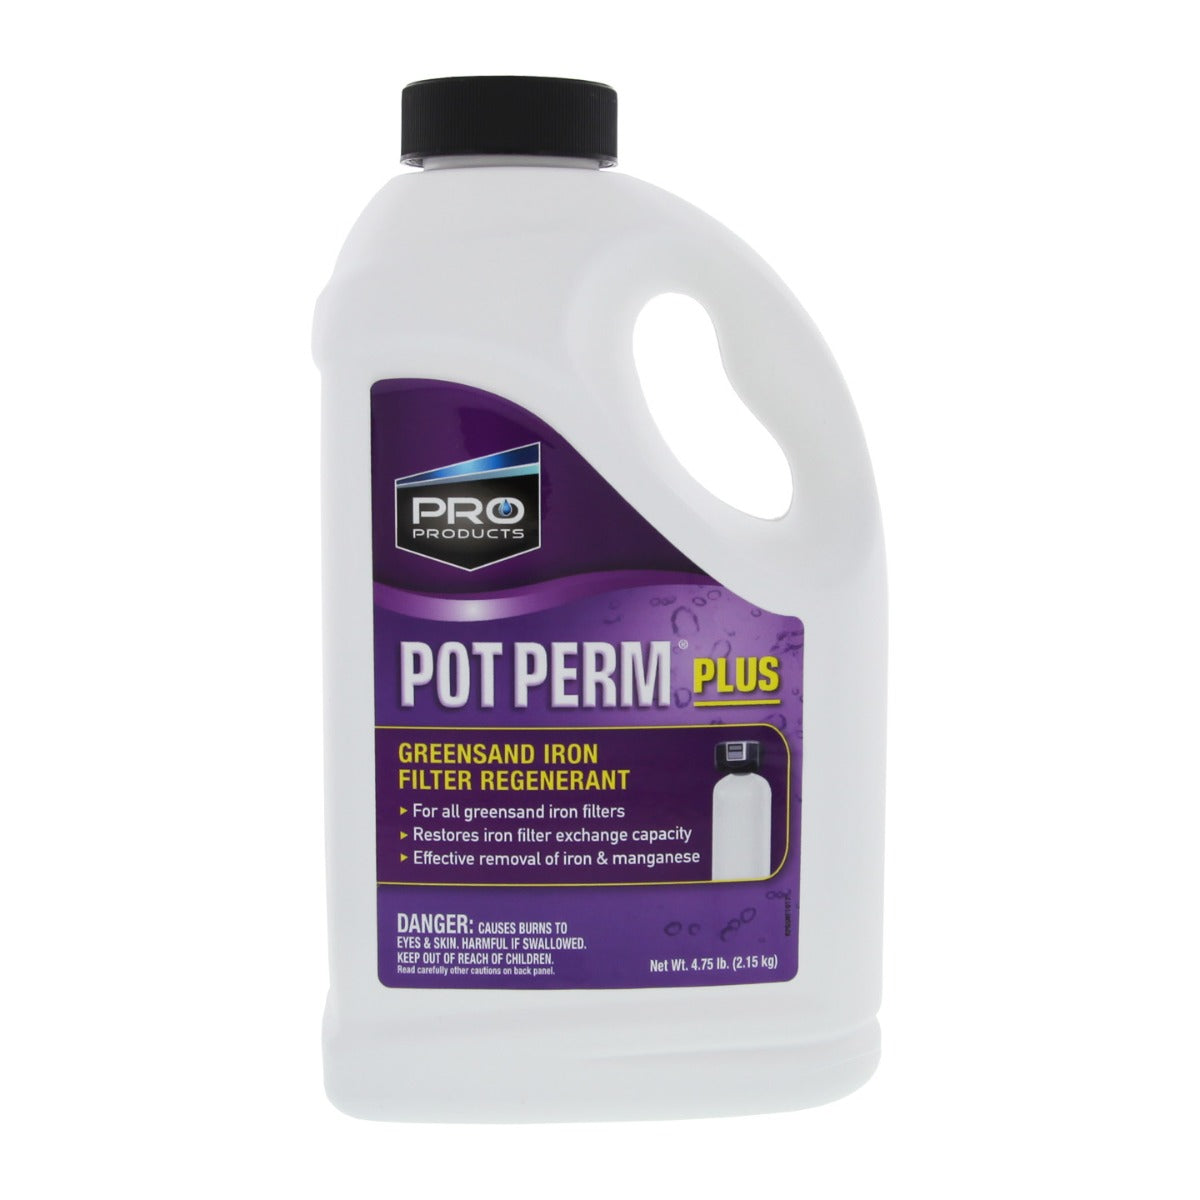 Pot Perm Free Flow Iron Filter Regenerant by Pro Products